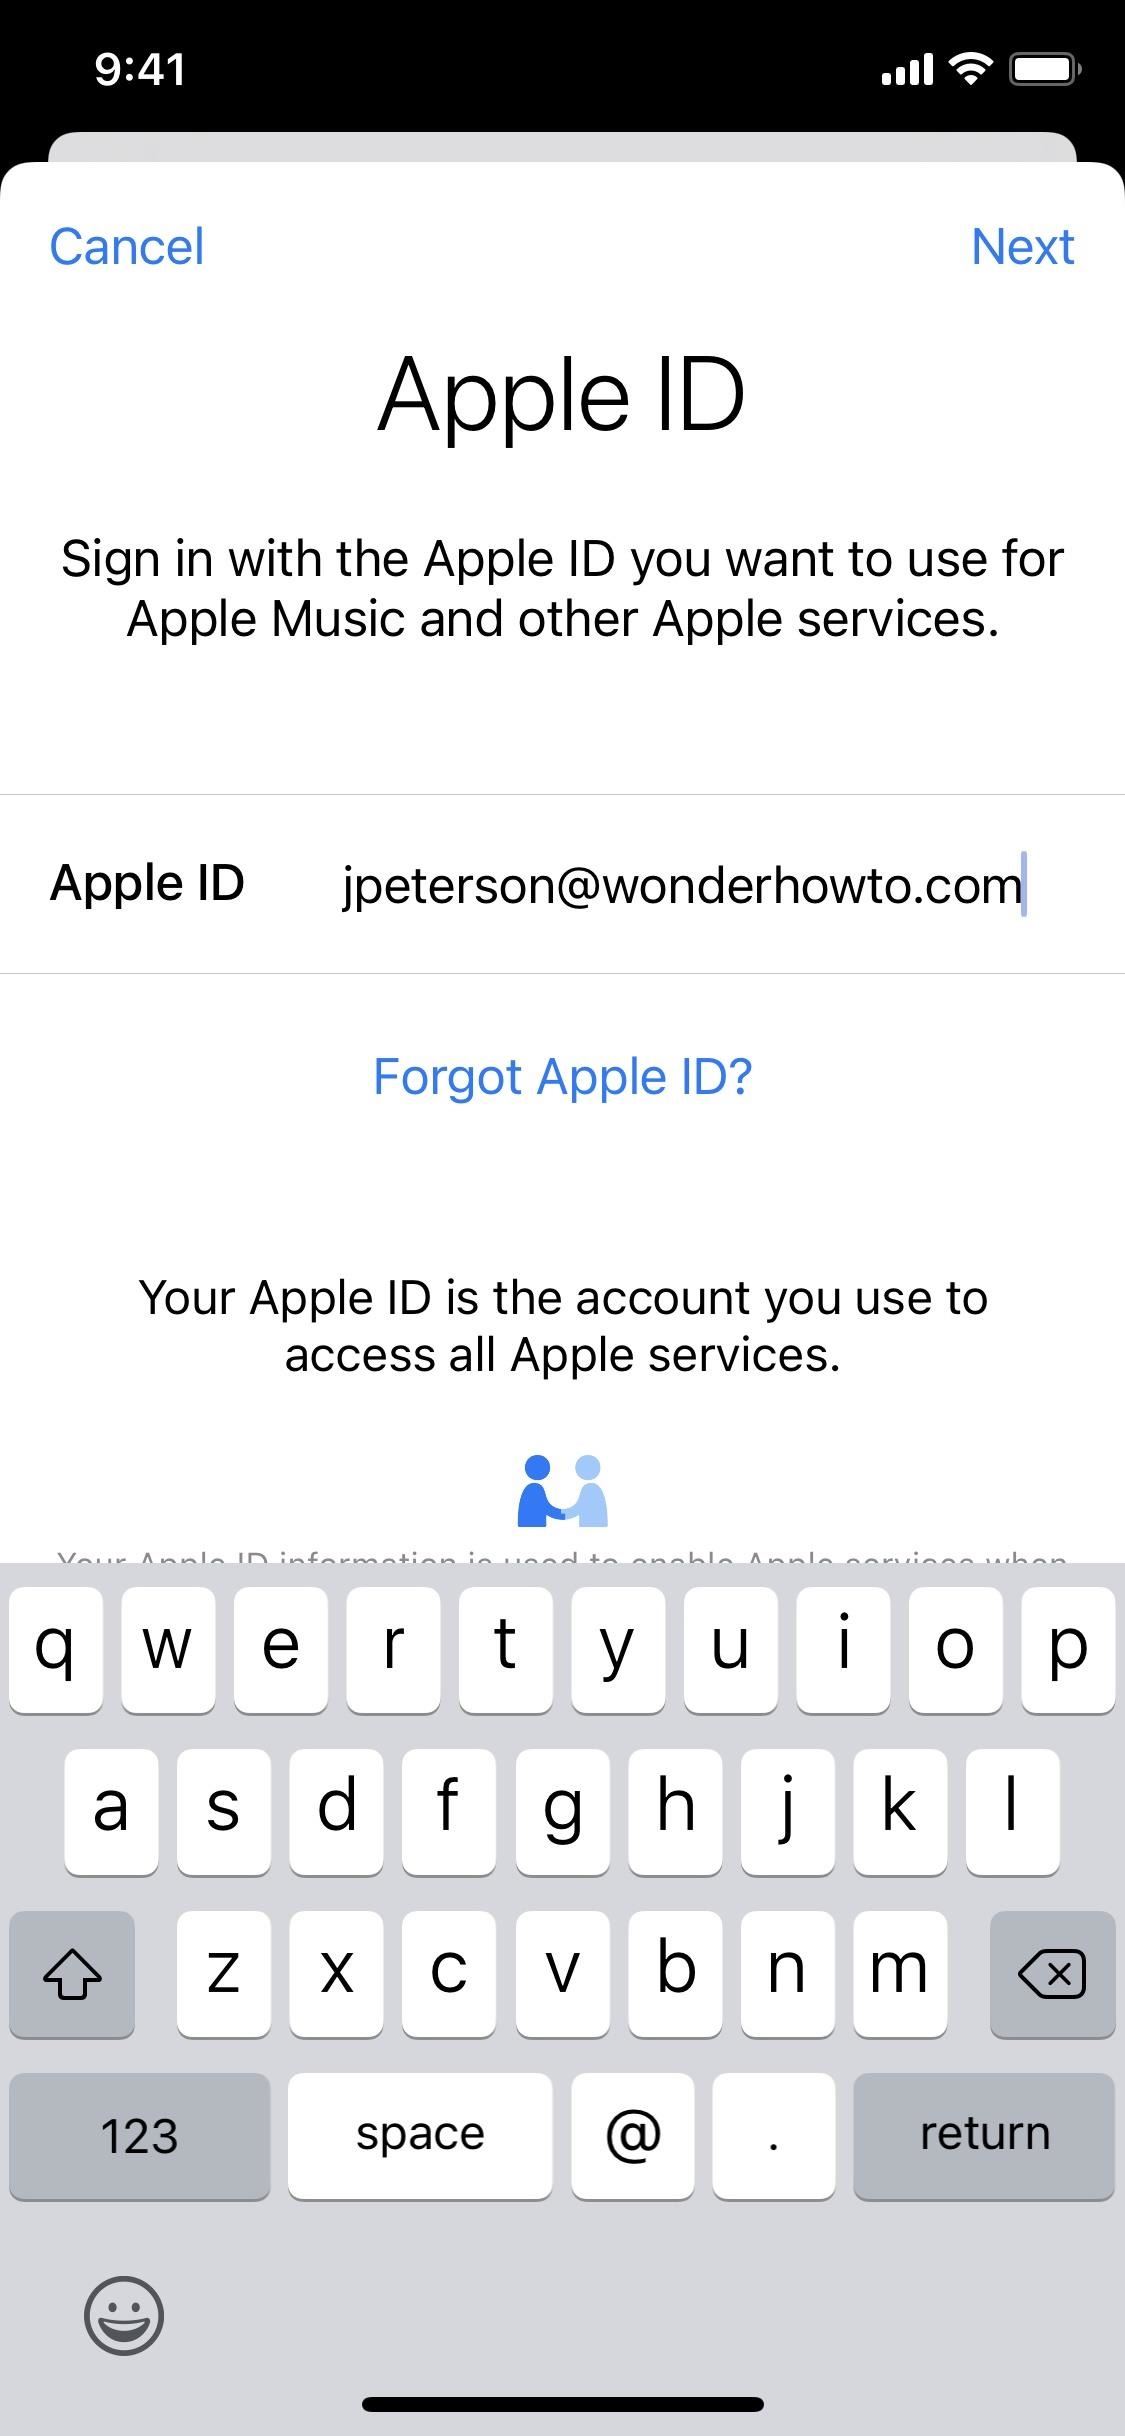 How to Use a Different Apple ID for Apple Music Without Using Family Sharing